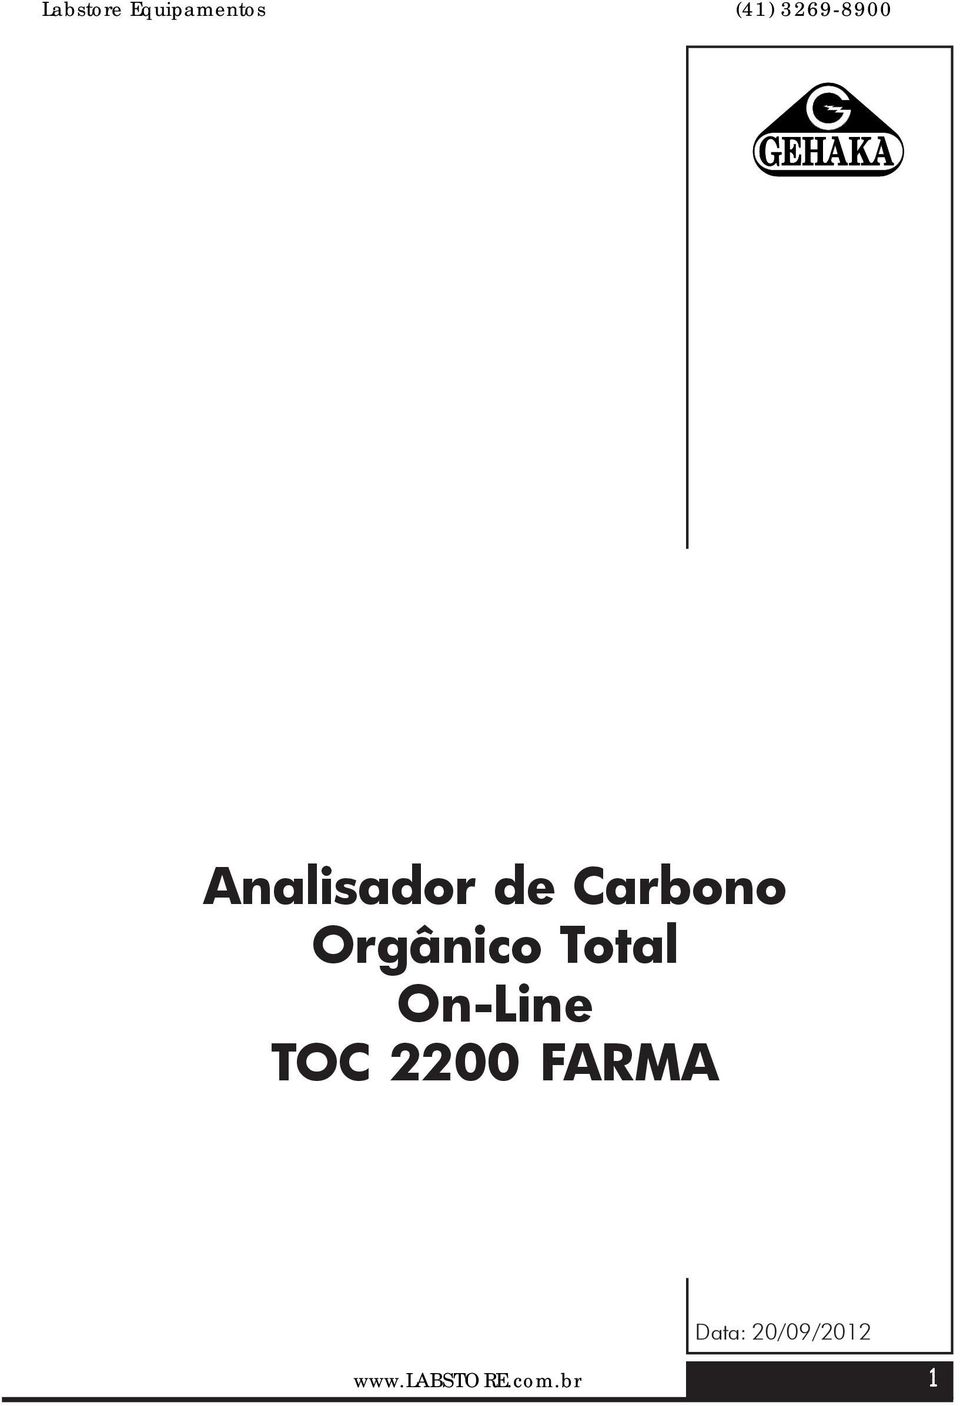 Total On-Line TOC